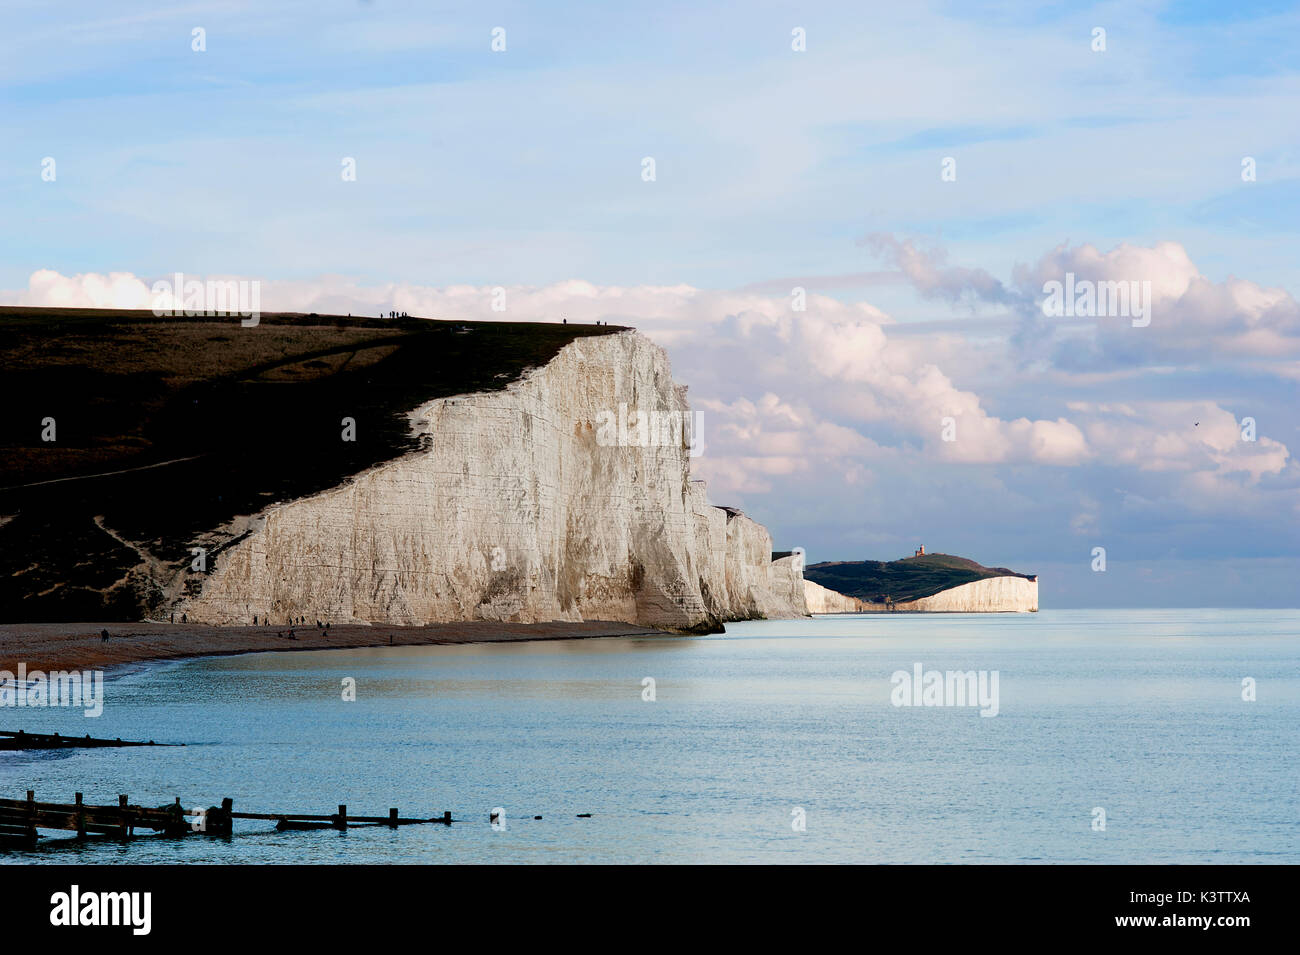 A dramatic view of the Seven Sisters, a series of white chalk cliffs by the English Channel. They form part of the South Downs in East Sussex, England Stock Photo